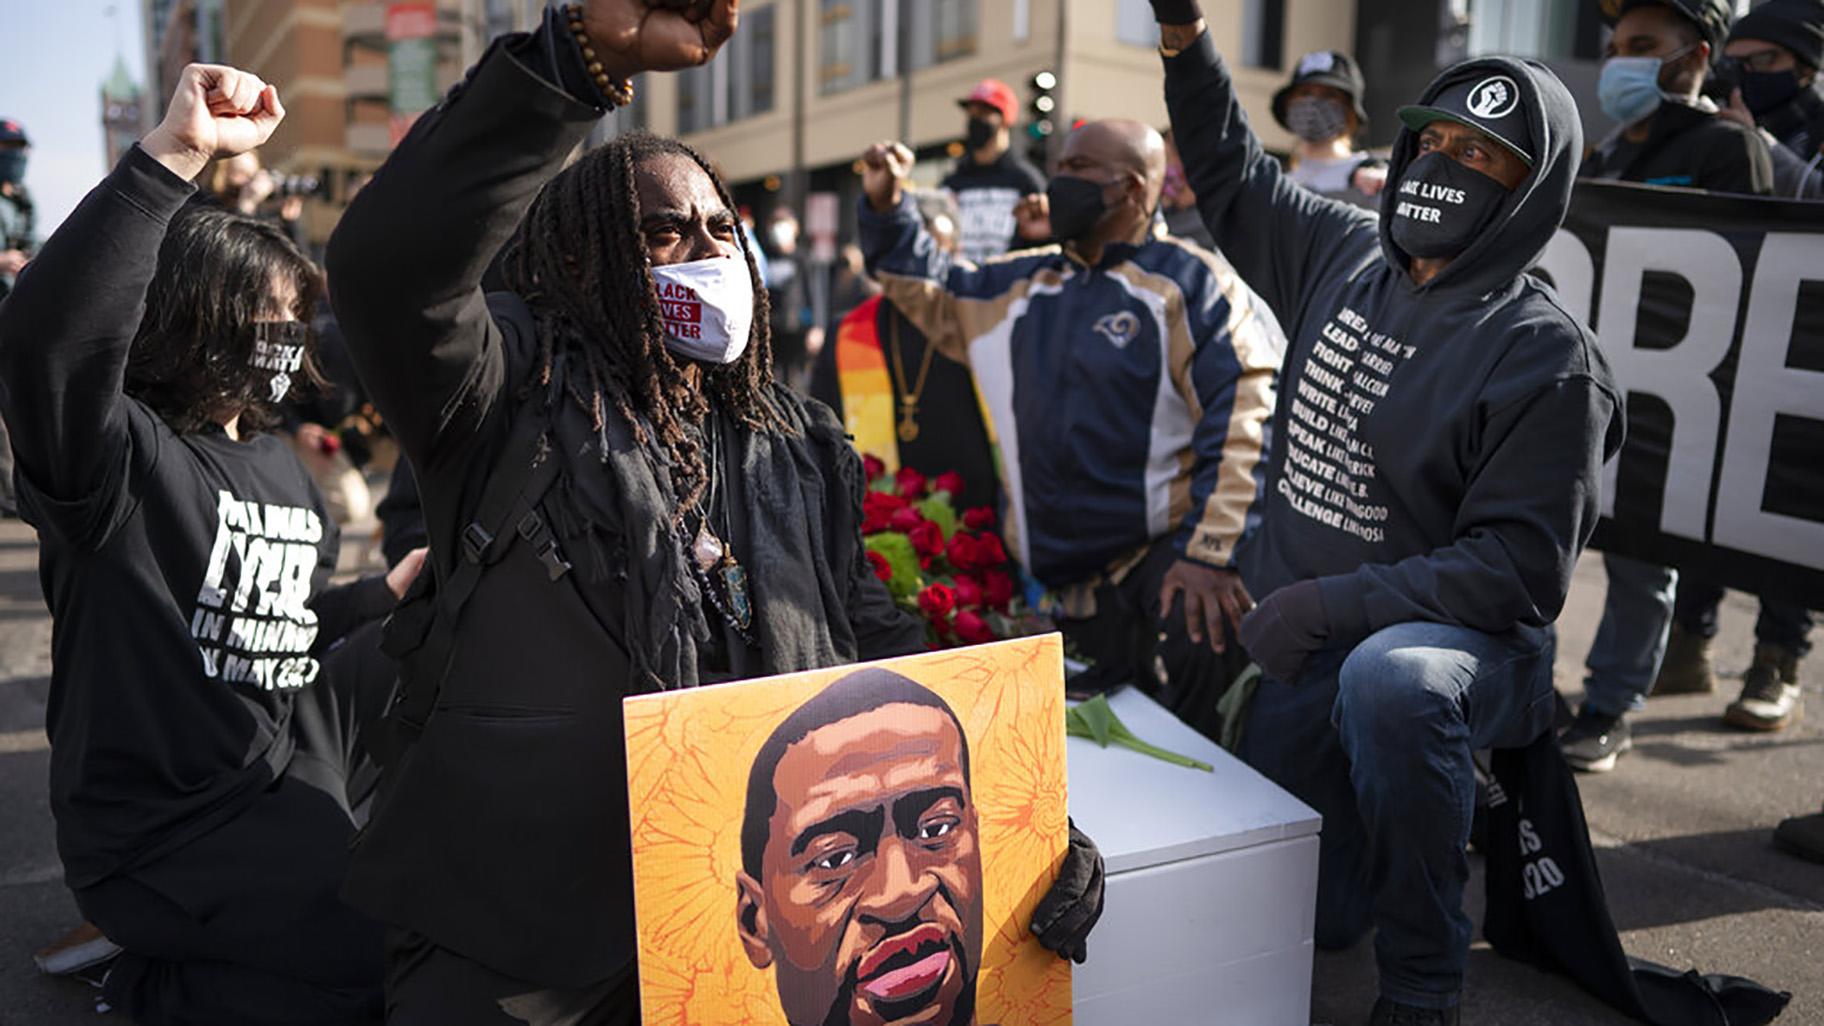 Cortez Rice, left, of Minneapolis, sits with others in the middle of Hennepin Avenue on Sunday, March 7, 2021, in Minneapolis, Minn., to mourn the death of George Floyd a day before jury selection is set to begin in the trial of former Minneapolis officer Derek Chauvin, who is charged in Floyd’s death. (Jerry Holt / Star Tribune via AP)